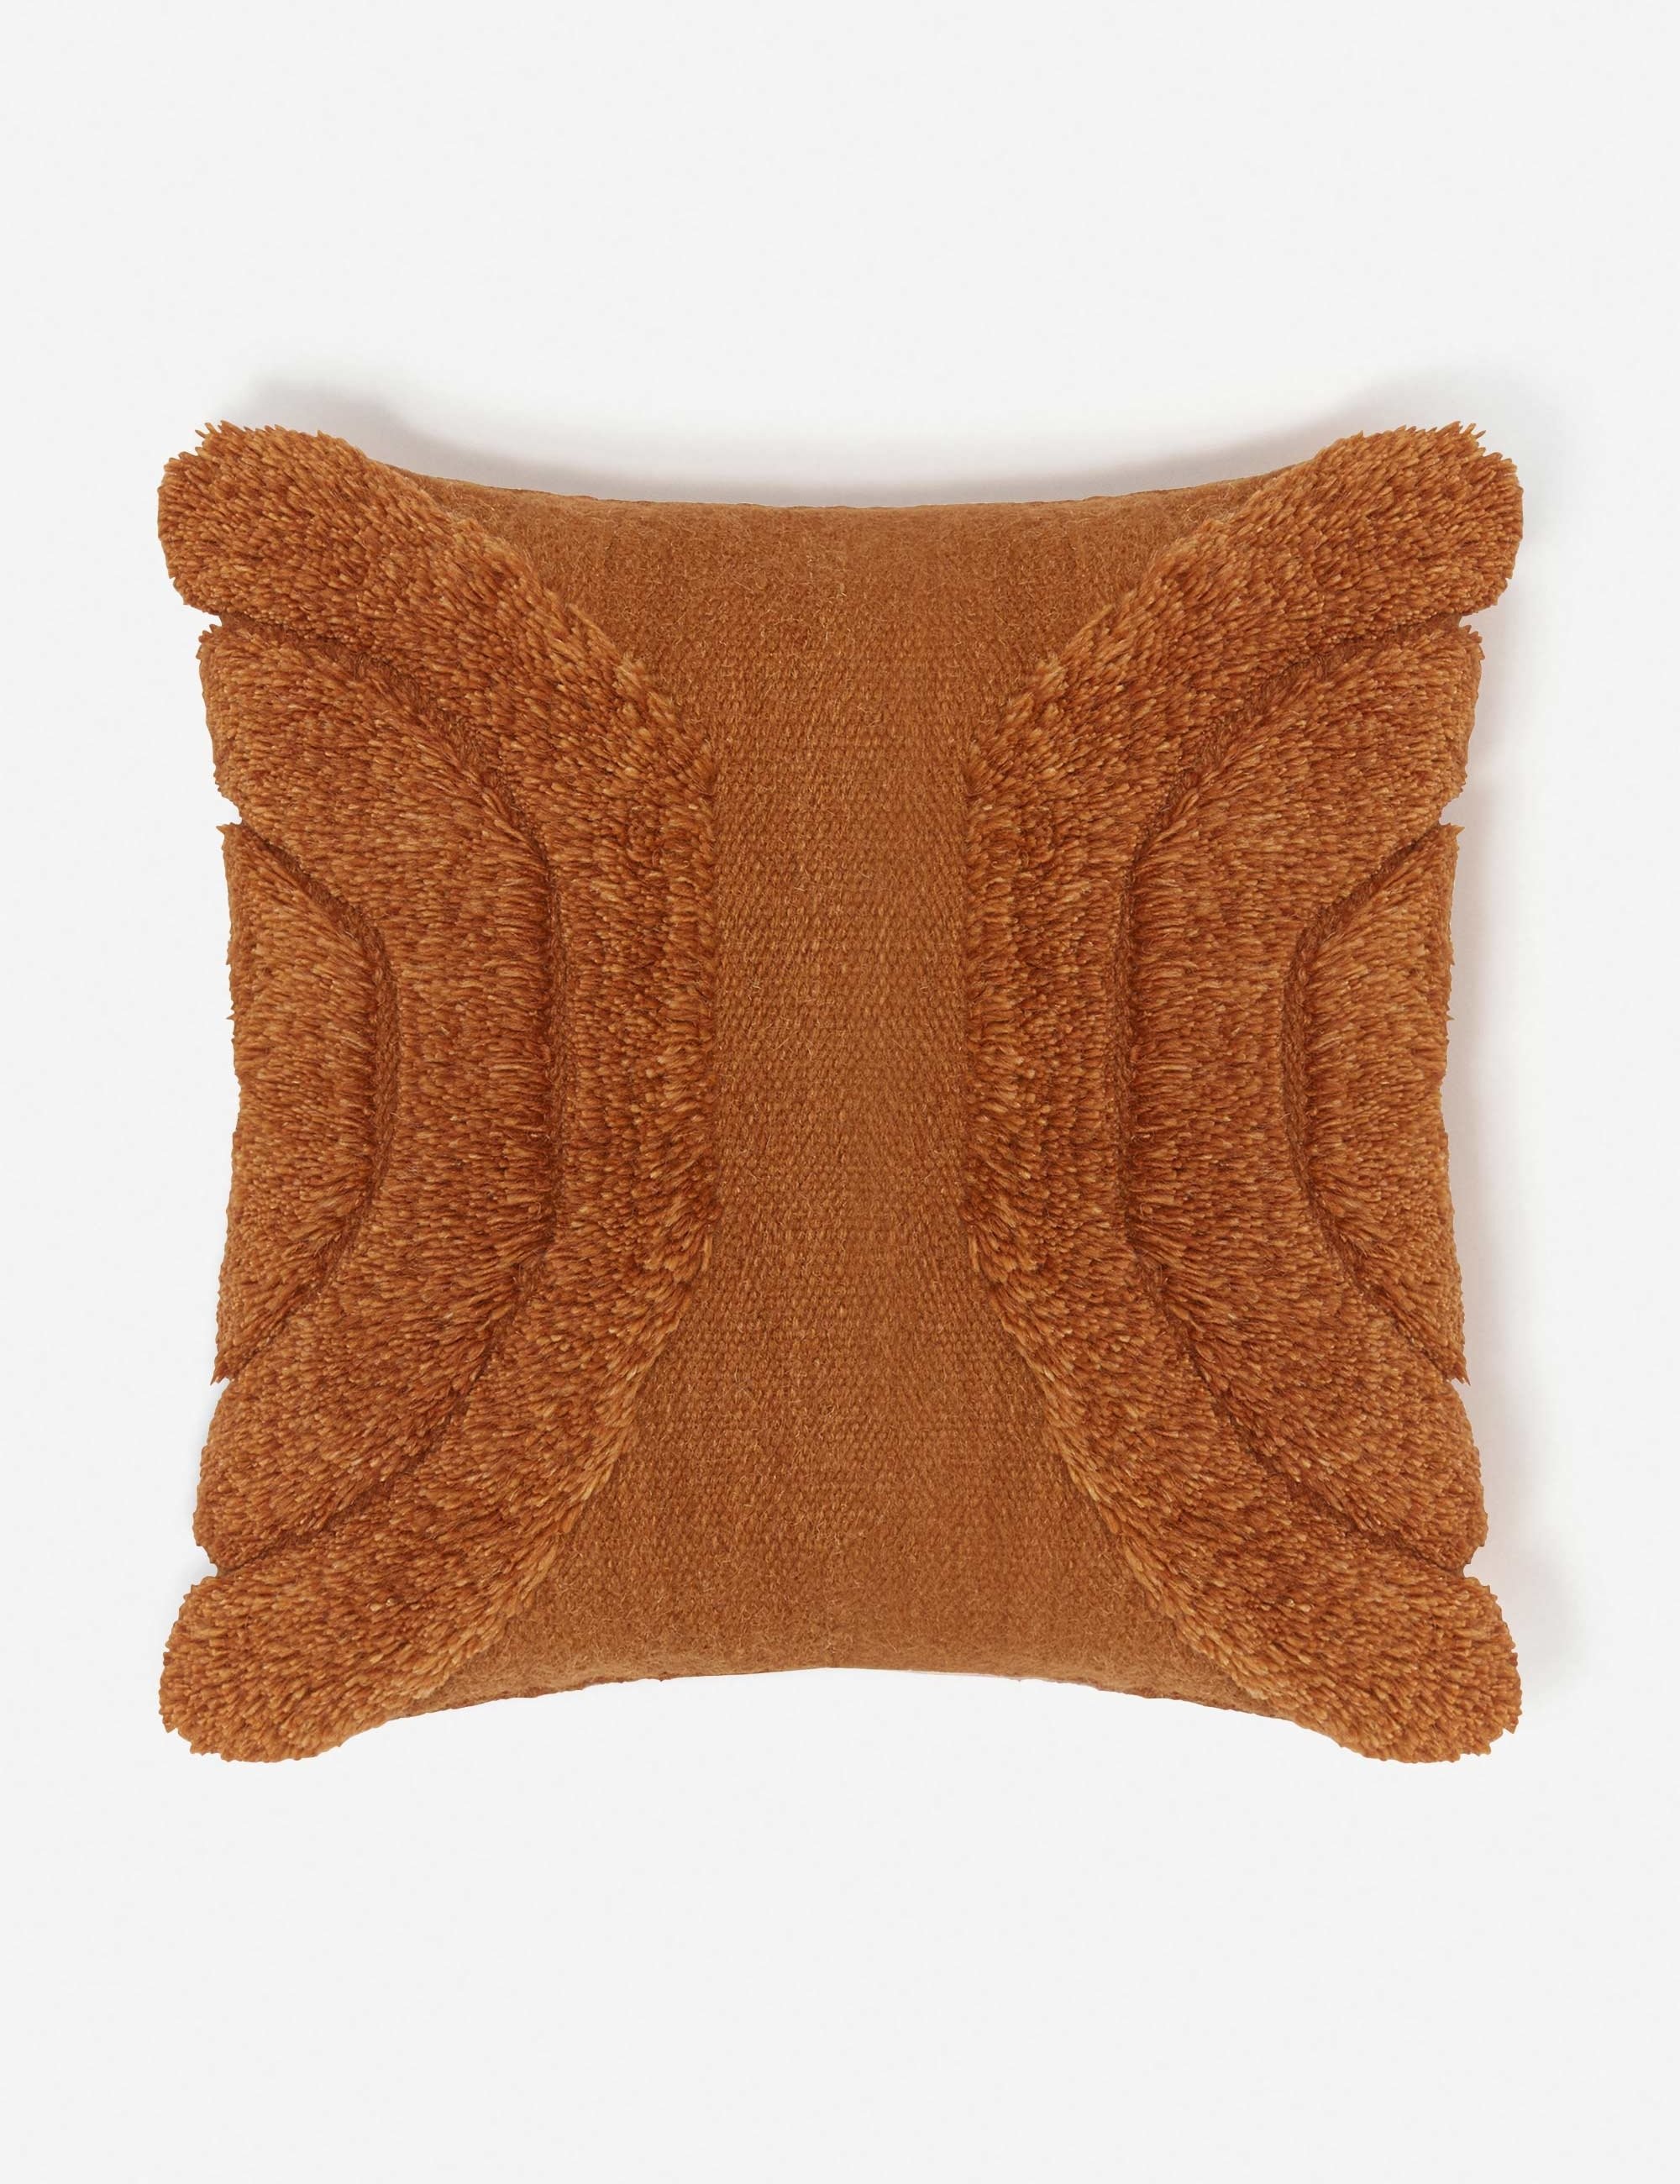 Arches Pillow, Rust By Sarah Sherman Samuel - Image 0